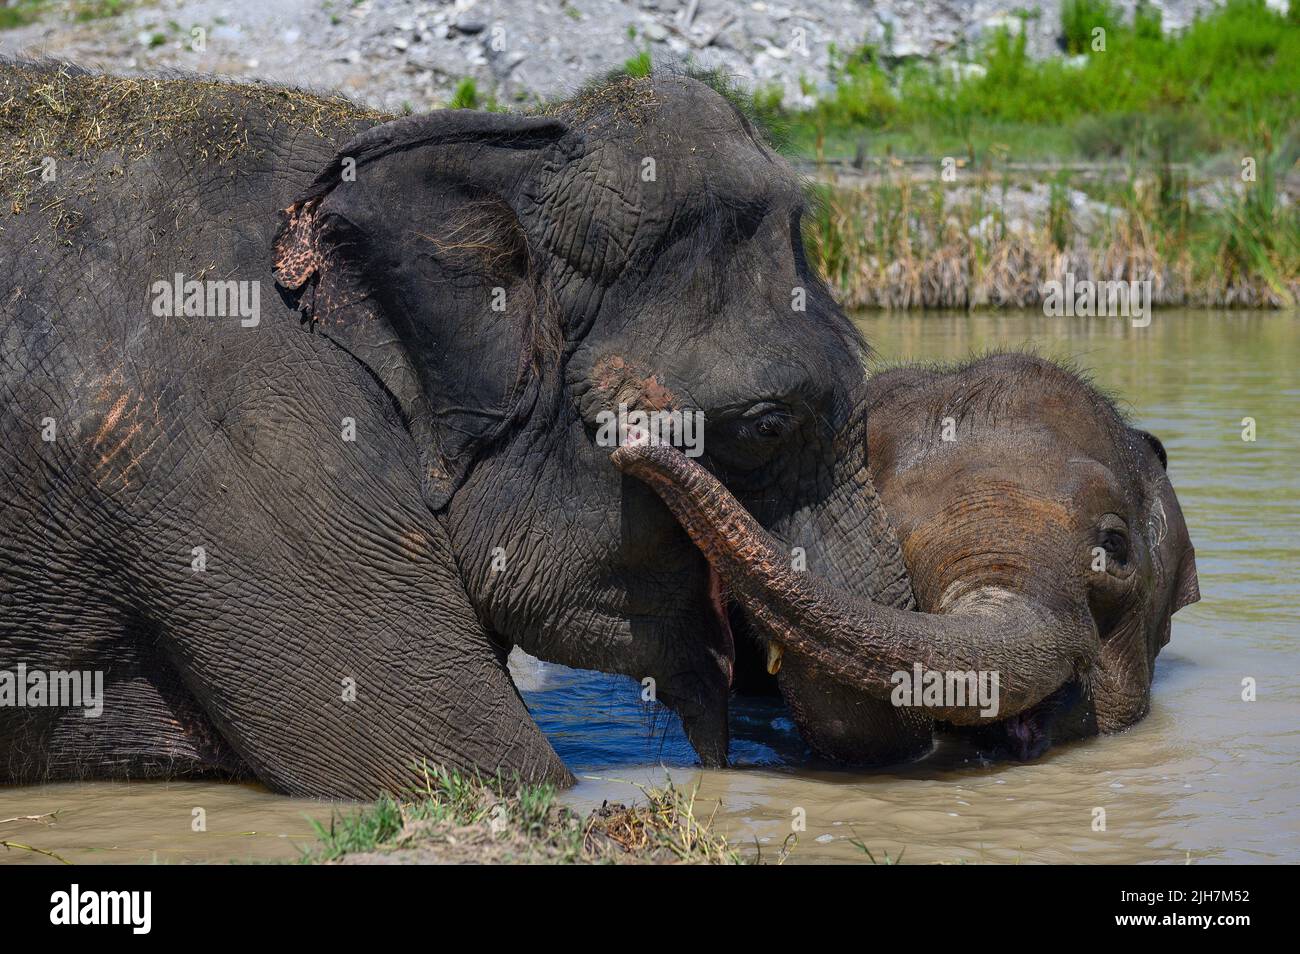 A young Asian elephant hugs an adult elephant with its trunk while standing in a pond. Portrait. Close-up. Stock Photo